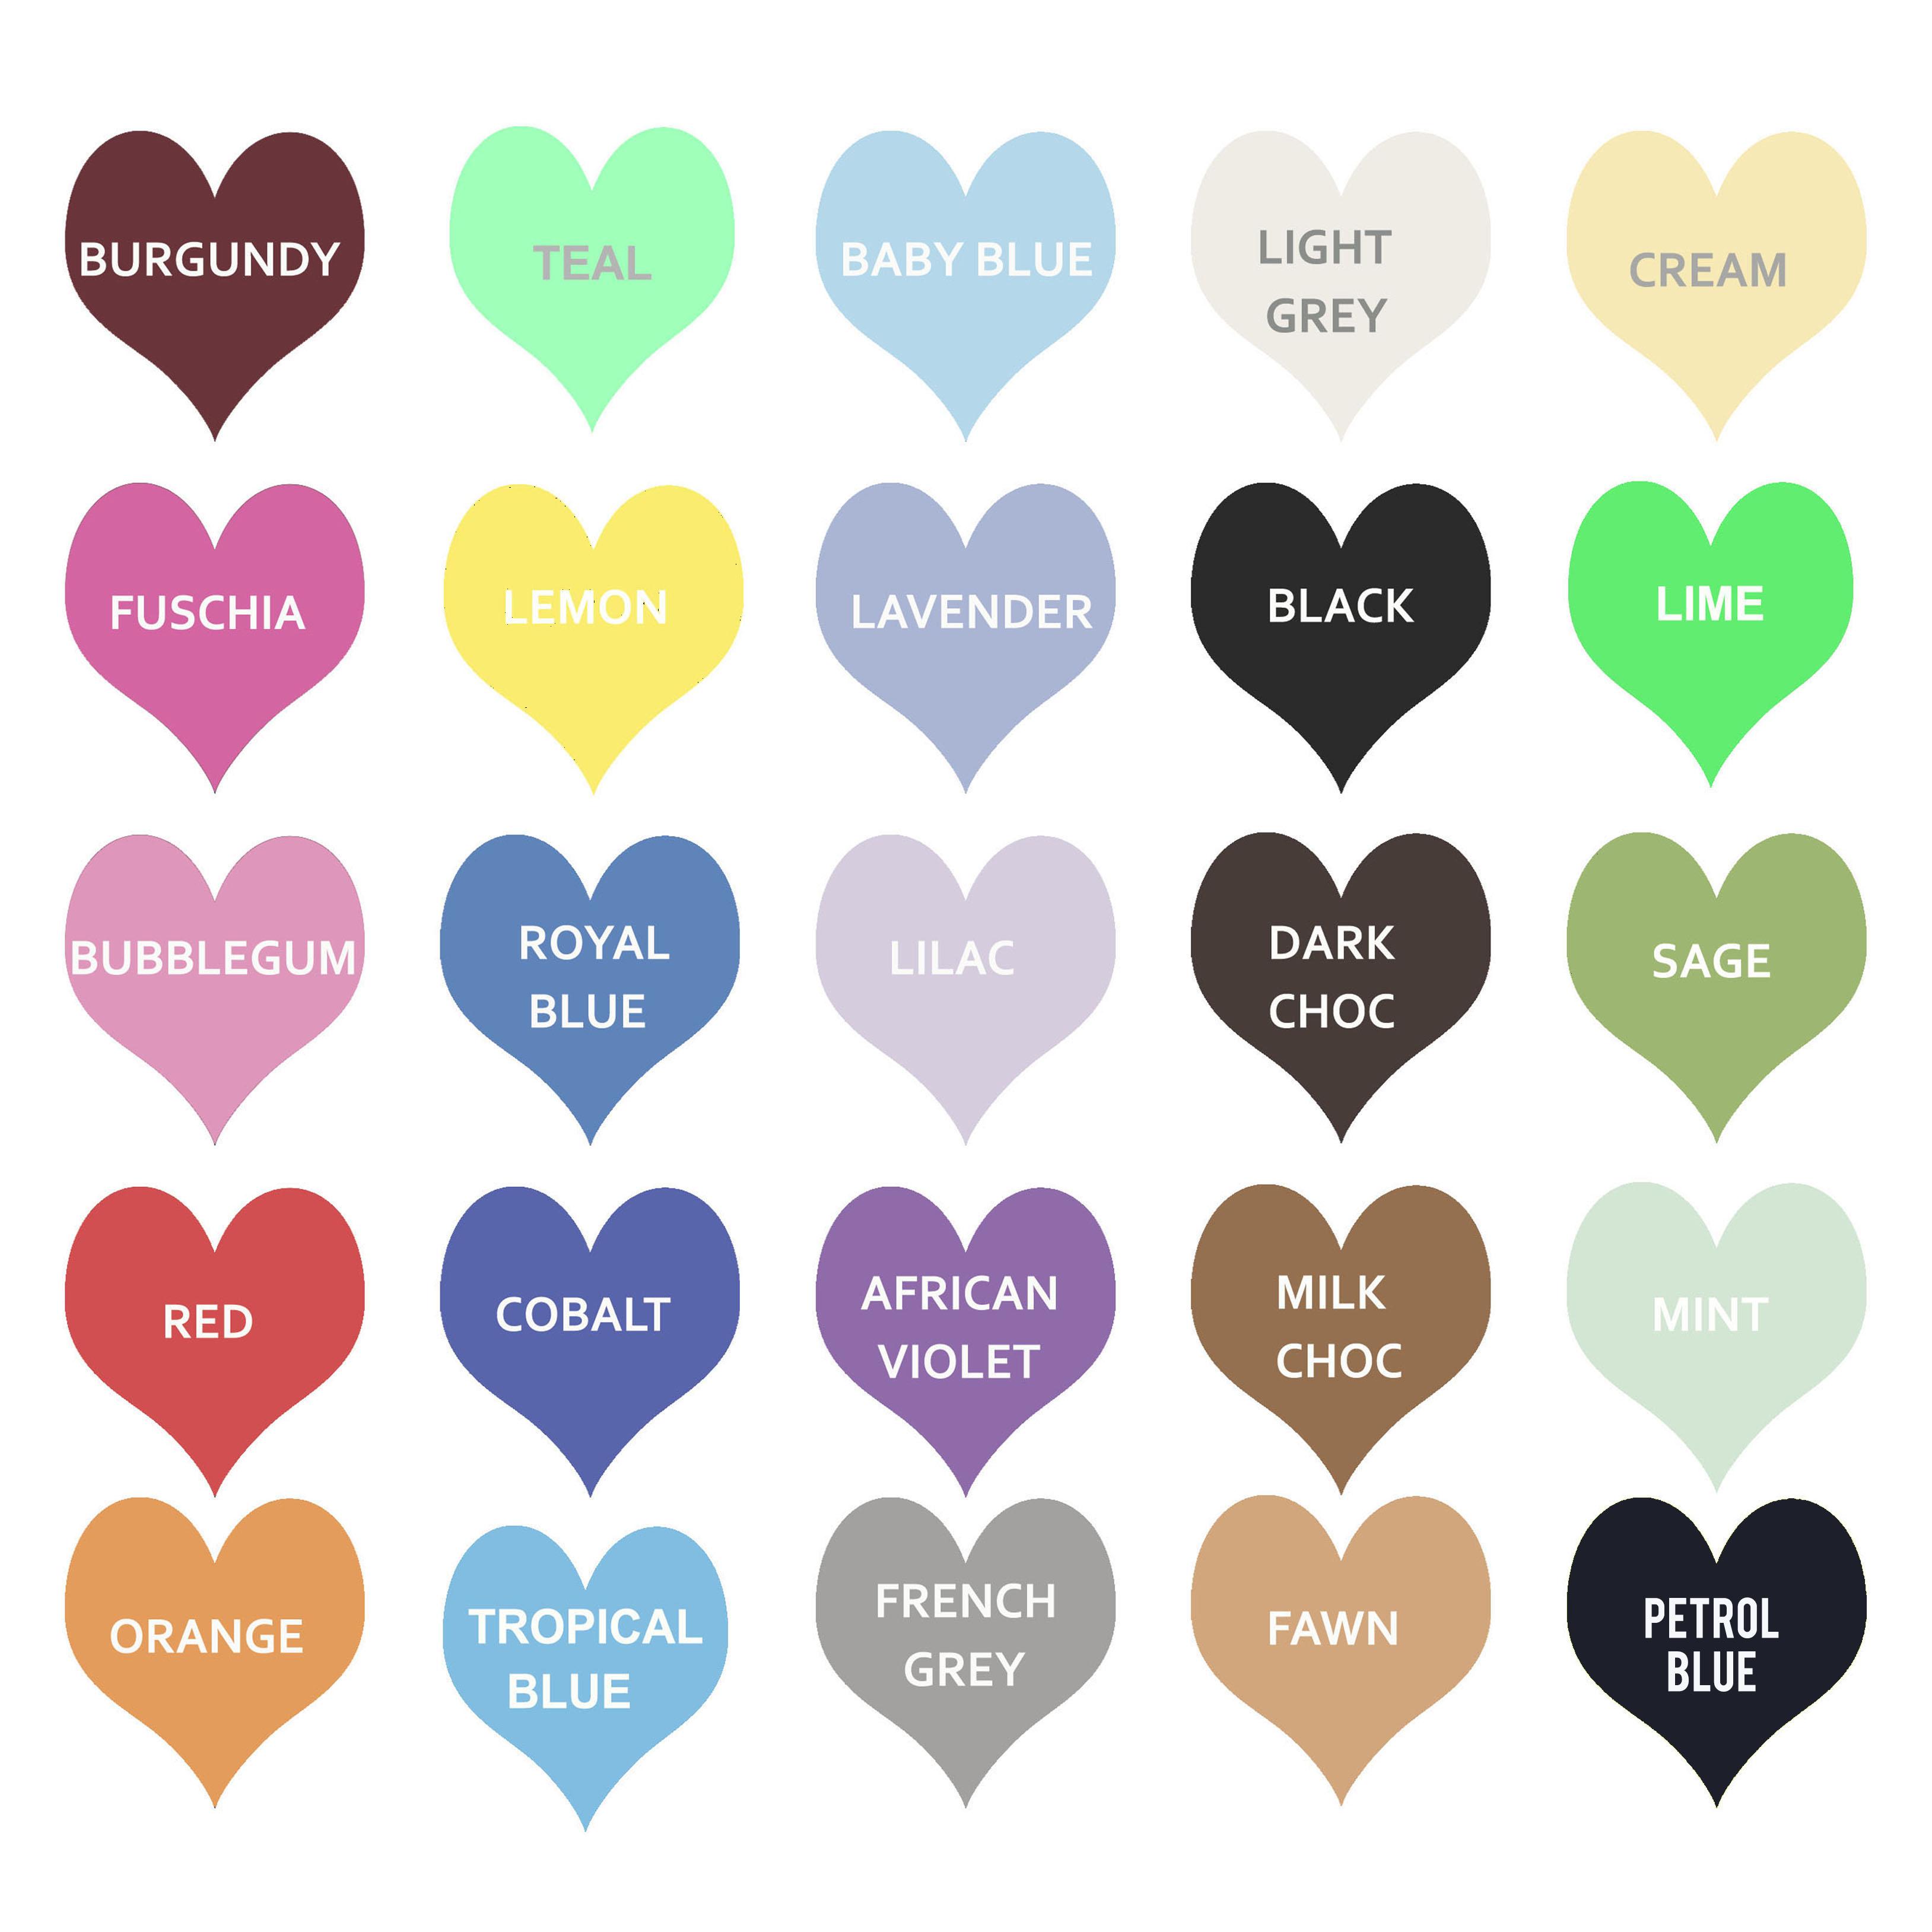 A chart of all of the available papercut and backgrounds colours. The colours are White Laid, White Hammered,  Fuschia, Bubblegum, Baby Pink, Red, Orange, Peach, Apricot, Royal Blue, Cobalt, Baby Blue, Tropical Blue, Lavender, Lilac, African Violet, French Grey, Light Grey, Black, Dark Choc, Milk Choc, Fawn, Cream, Lime, Sage, Mint, Parakeet, Teal, Lemon, Burgundy, Silver, Gold, Pearlised White, Ivory Pearlised, Ruby Pearlised and Diamond pearl white